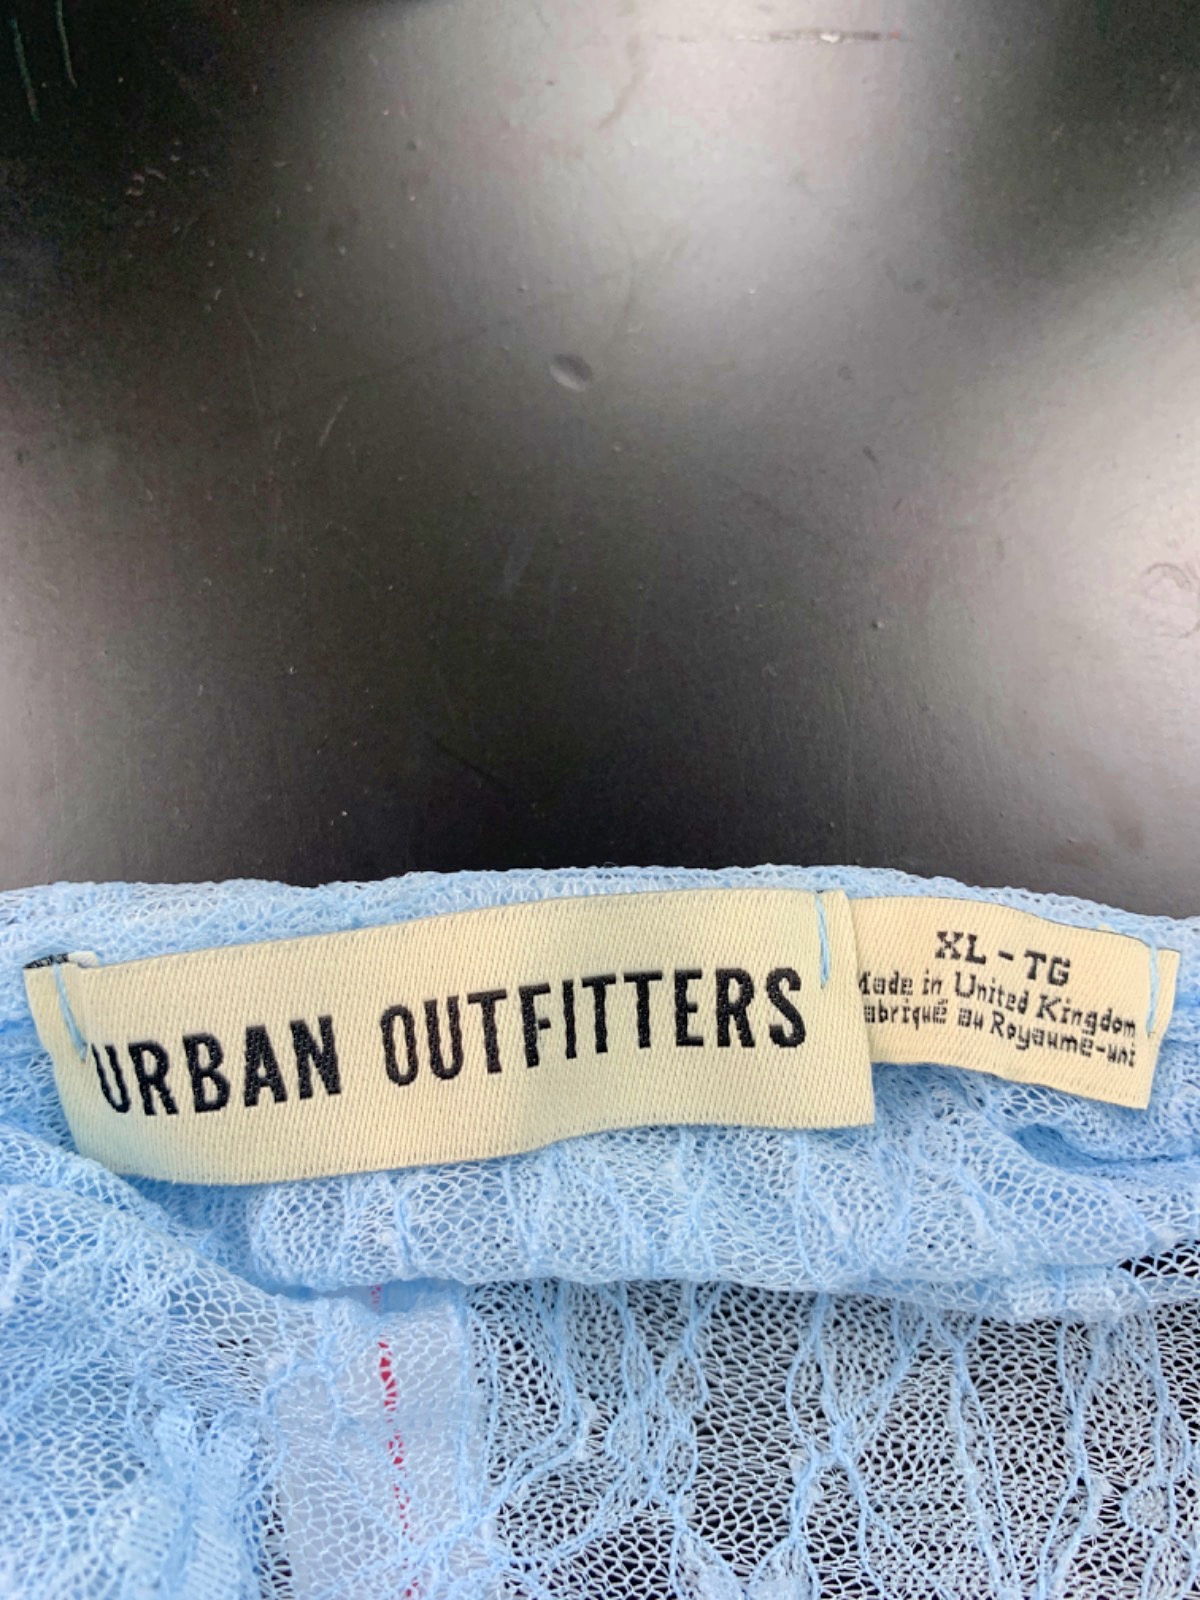 Urban Outfitters Blue Lace Bralette XL